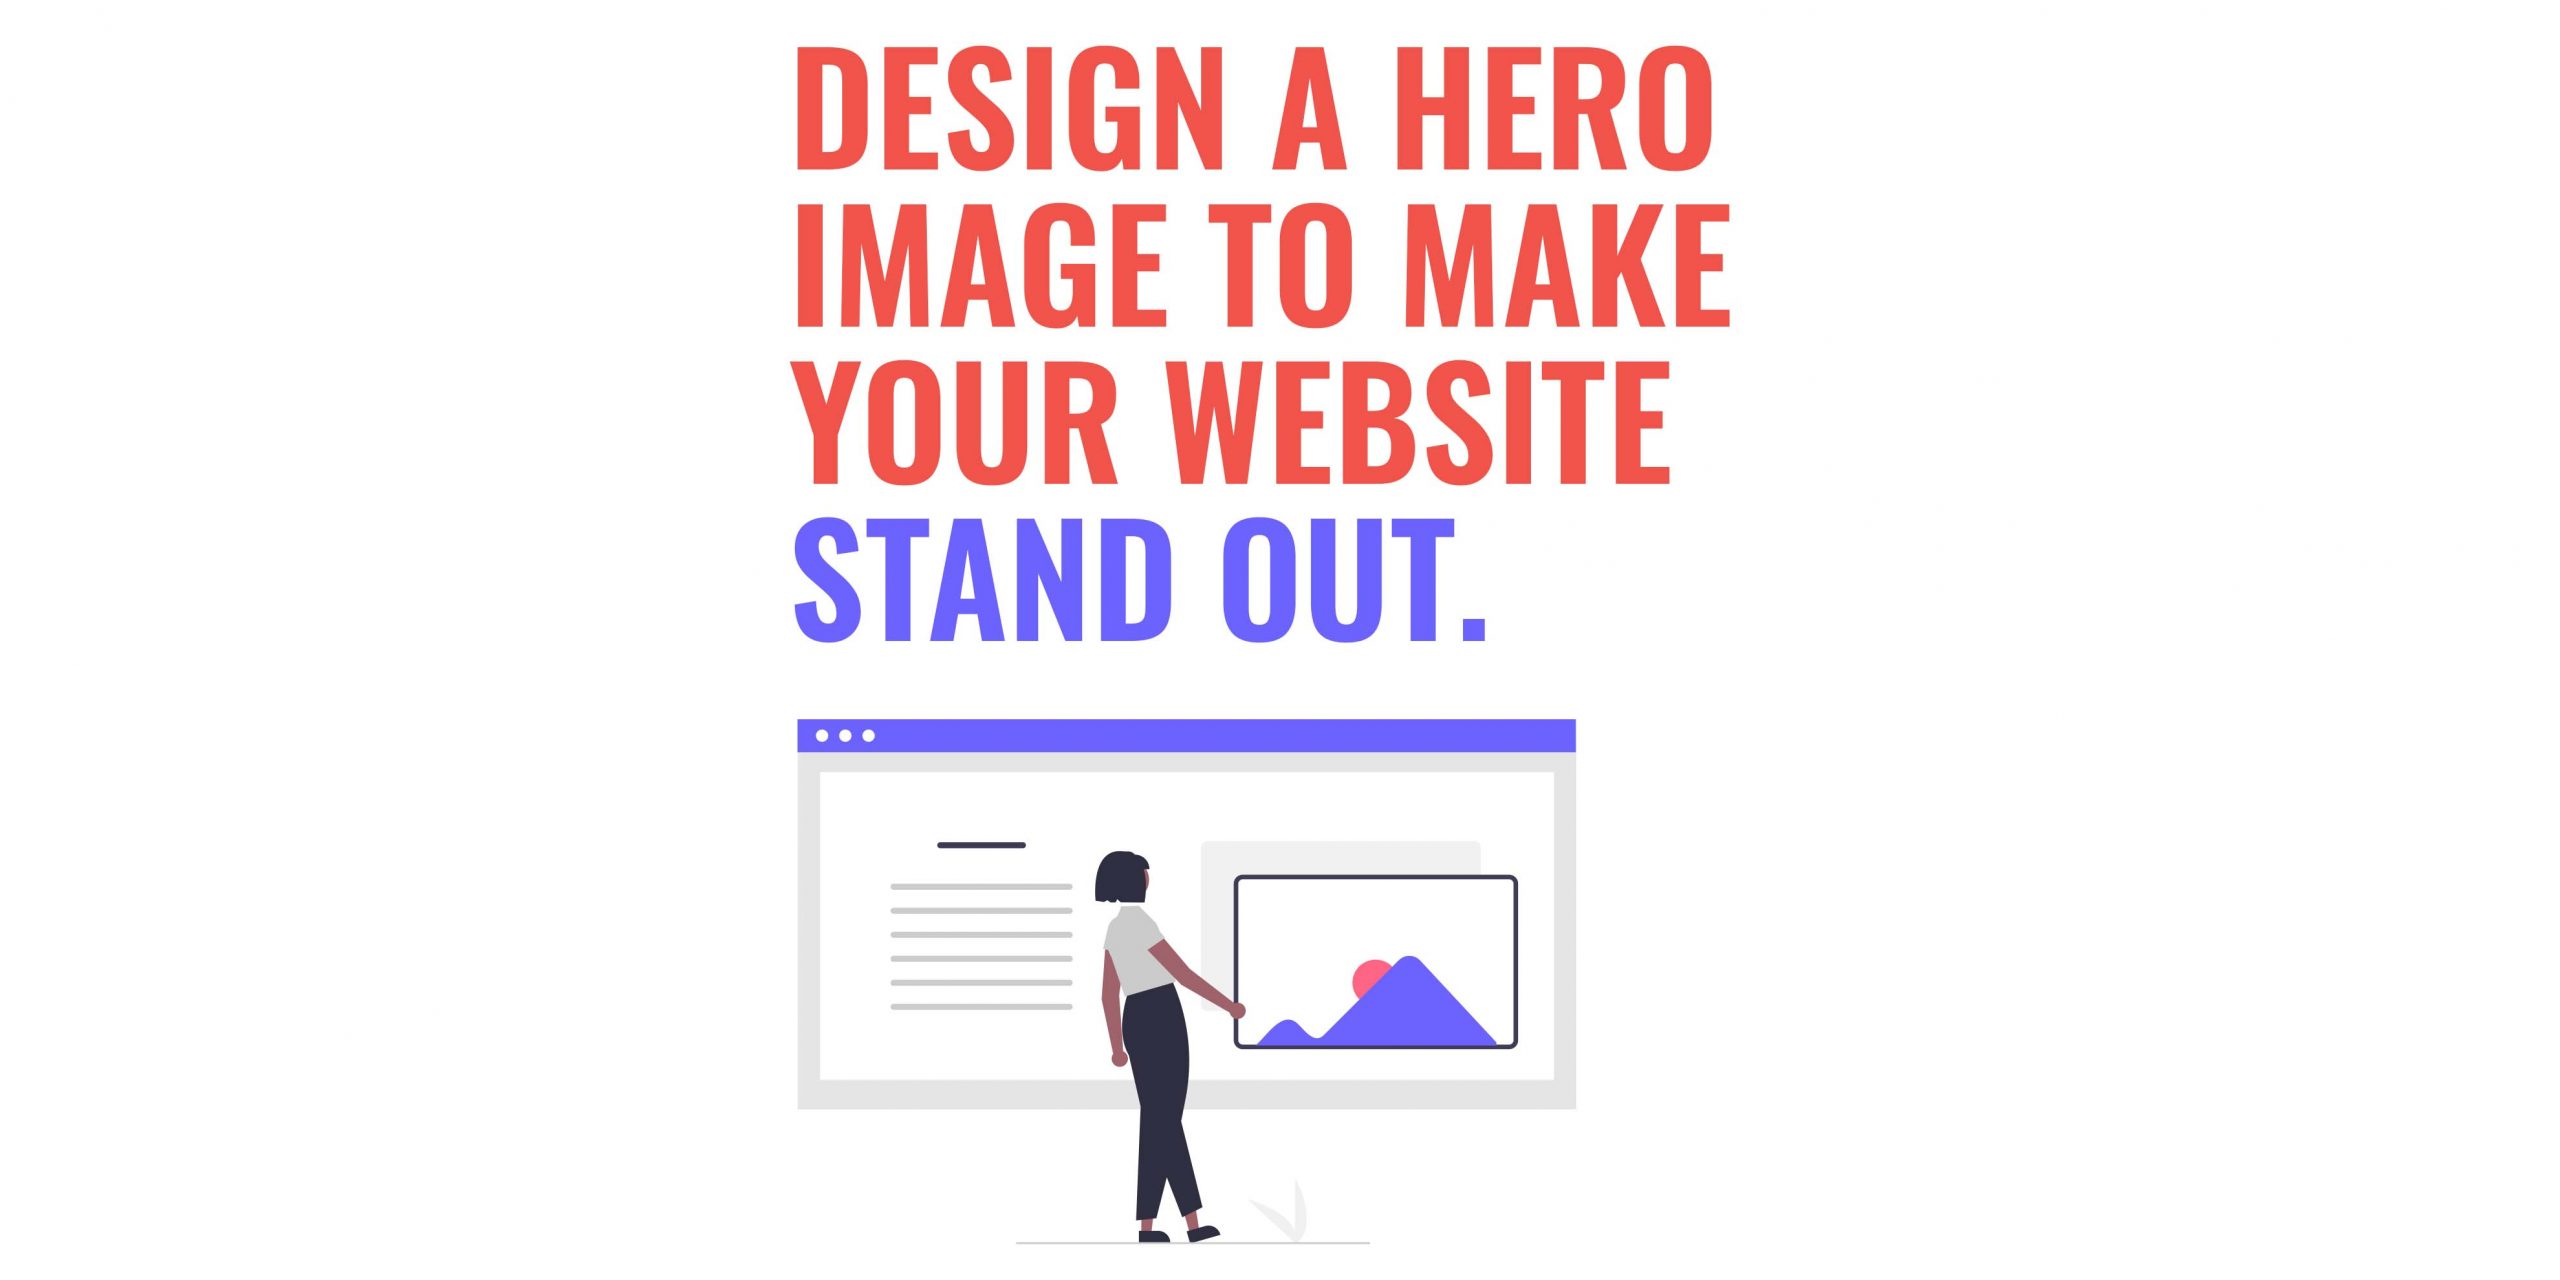 Design a hero image to make your website stand out